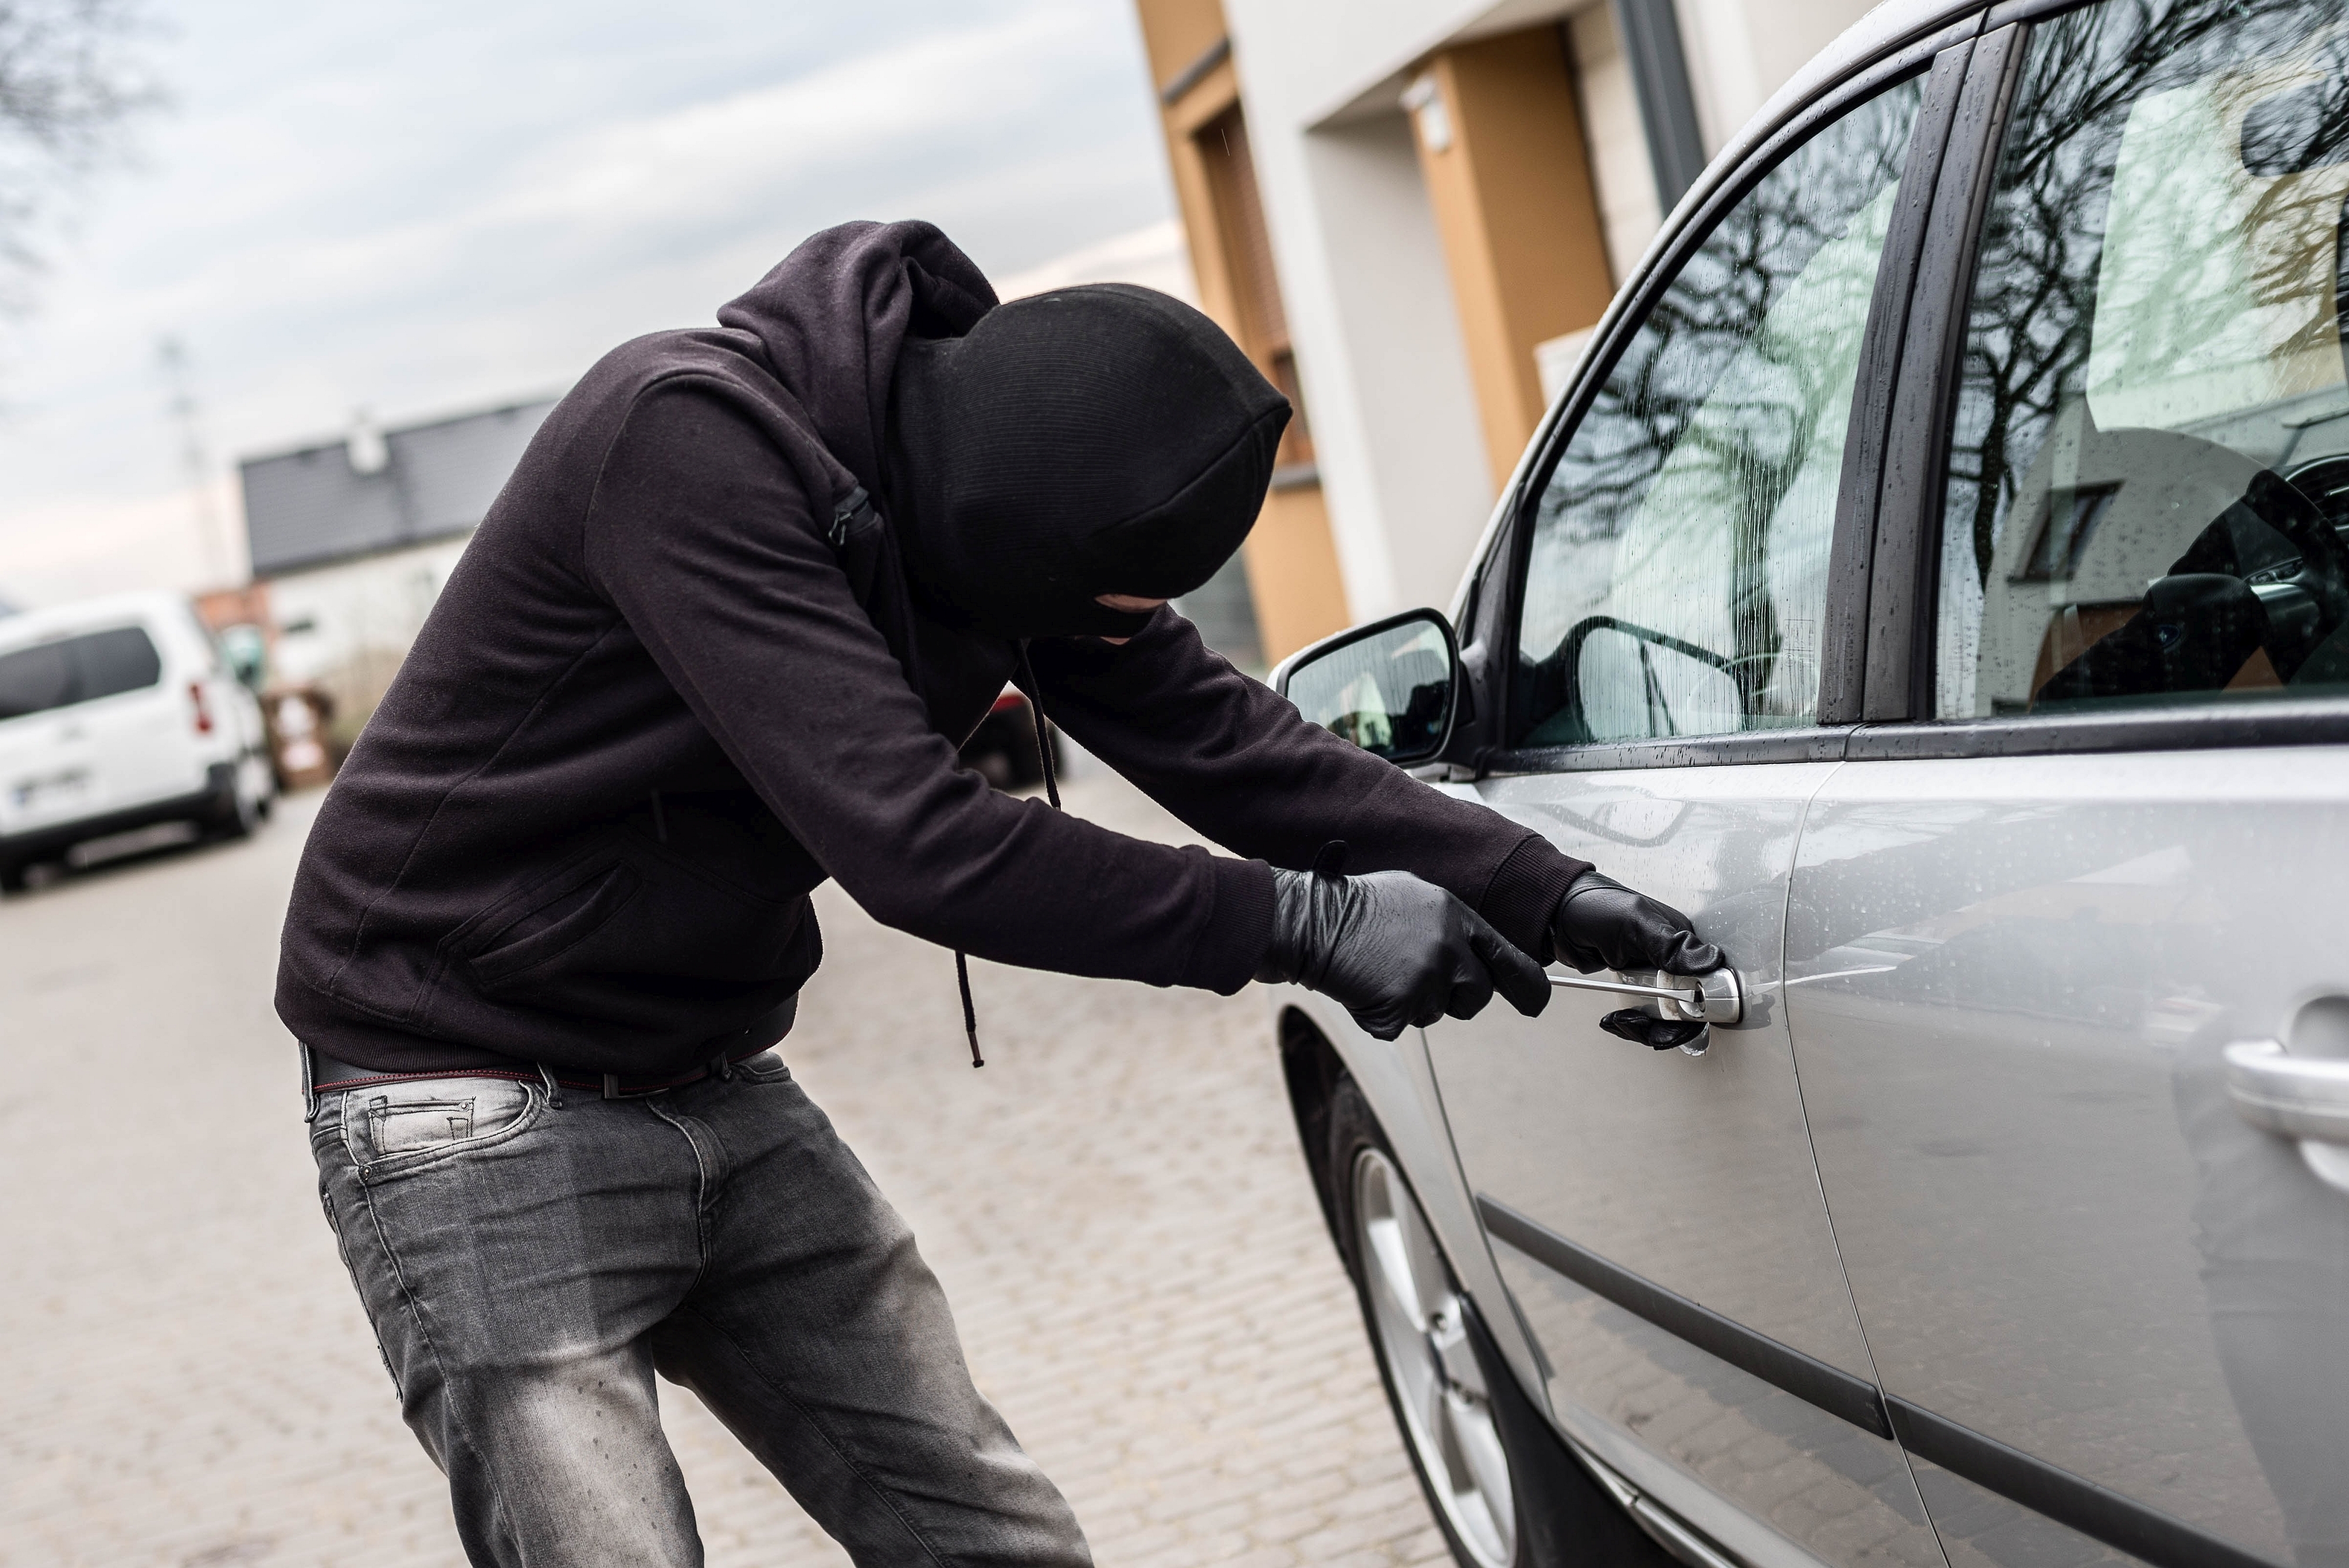 Breaking into a vehicle - Ohio theft laws